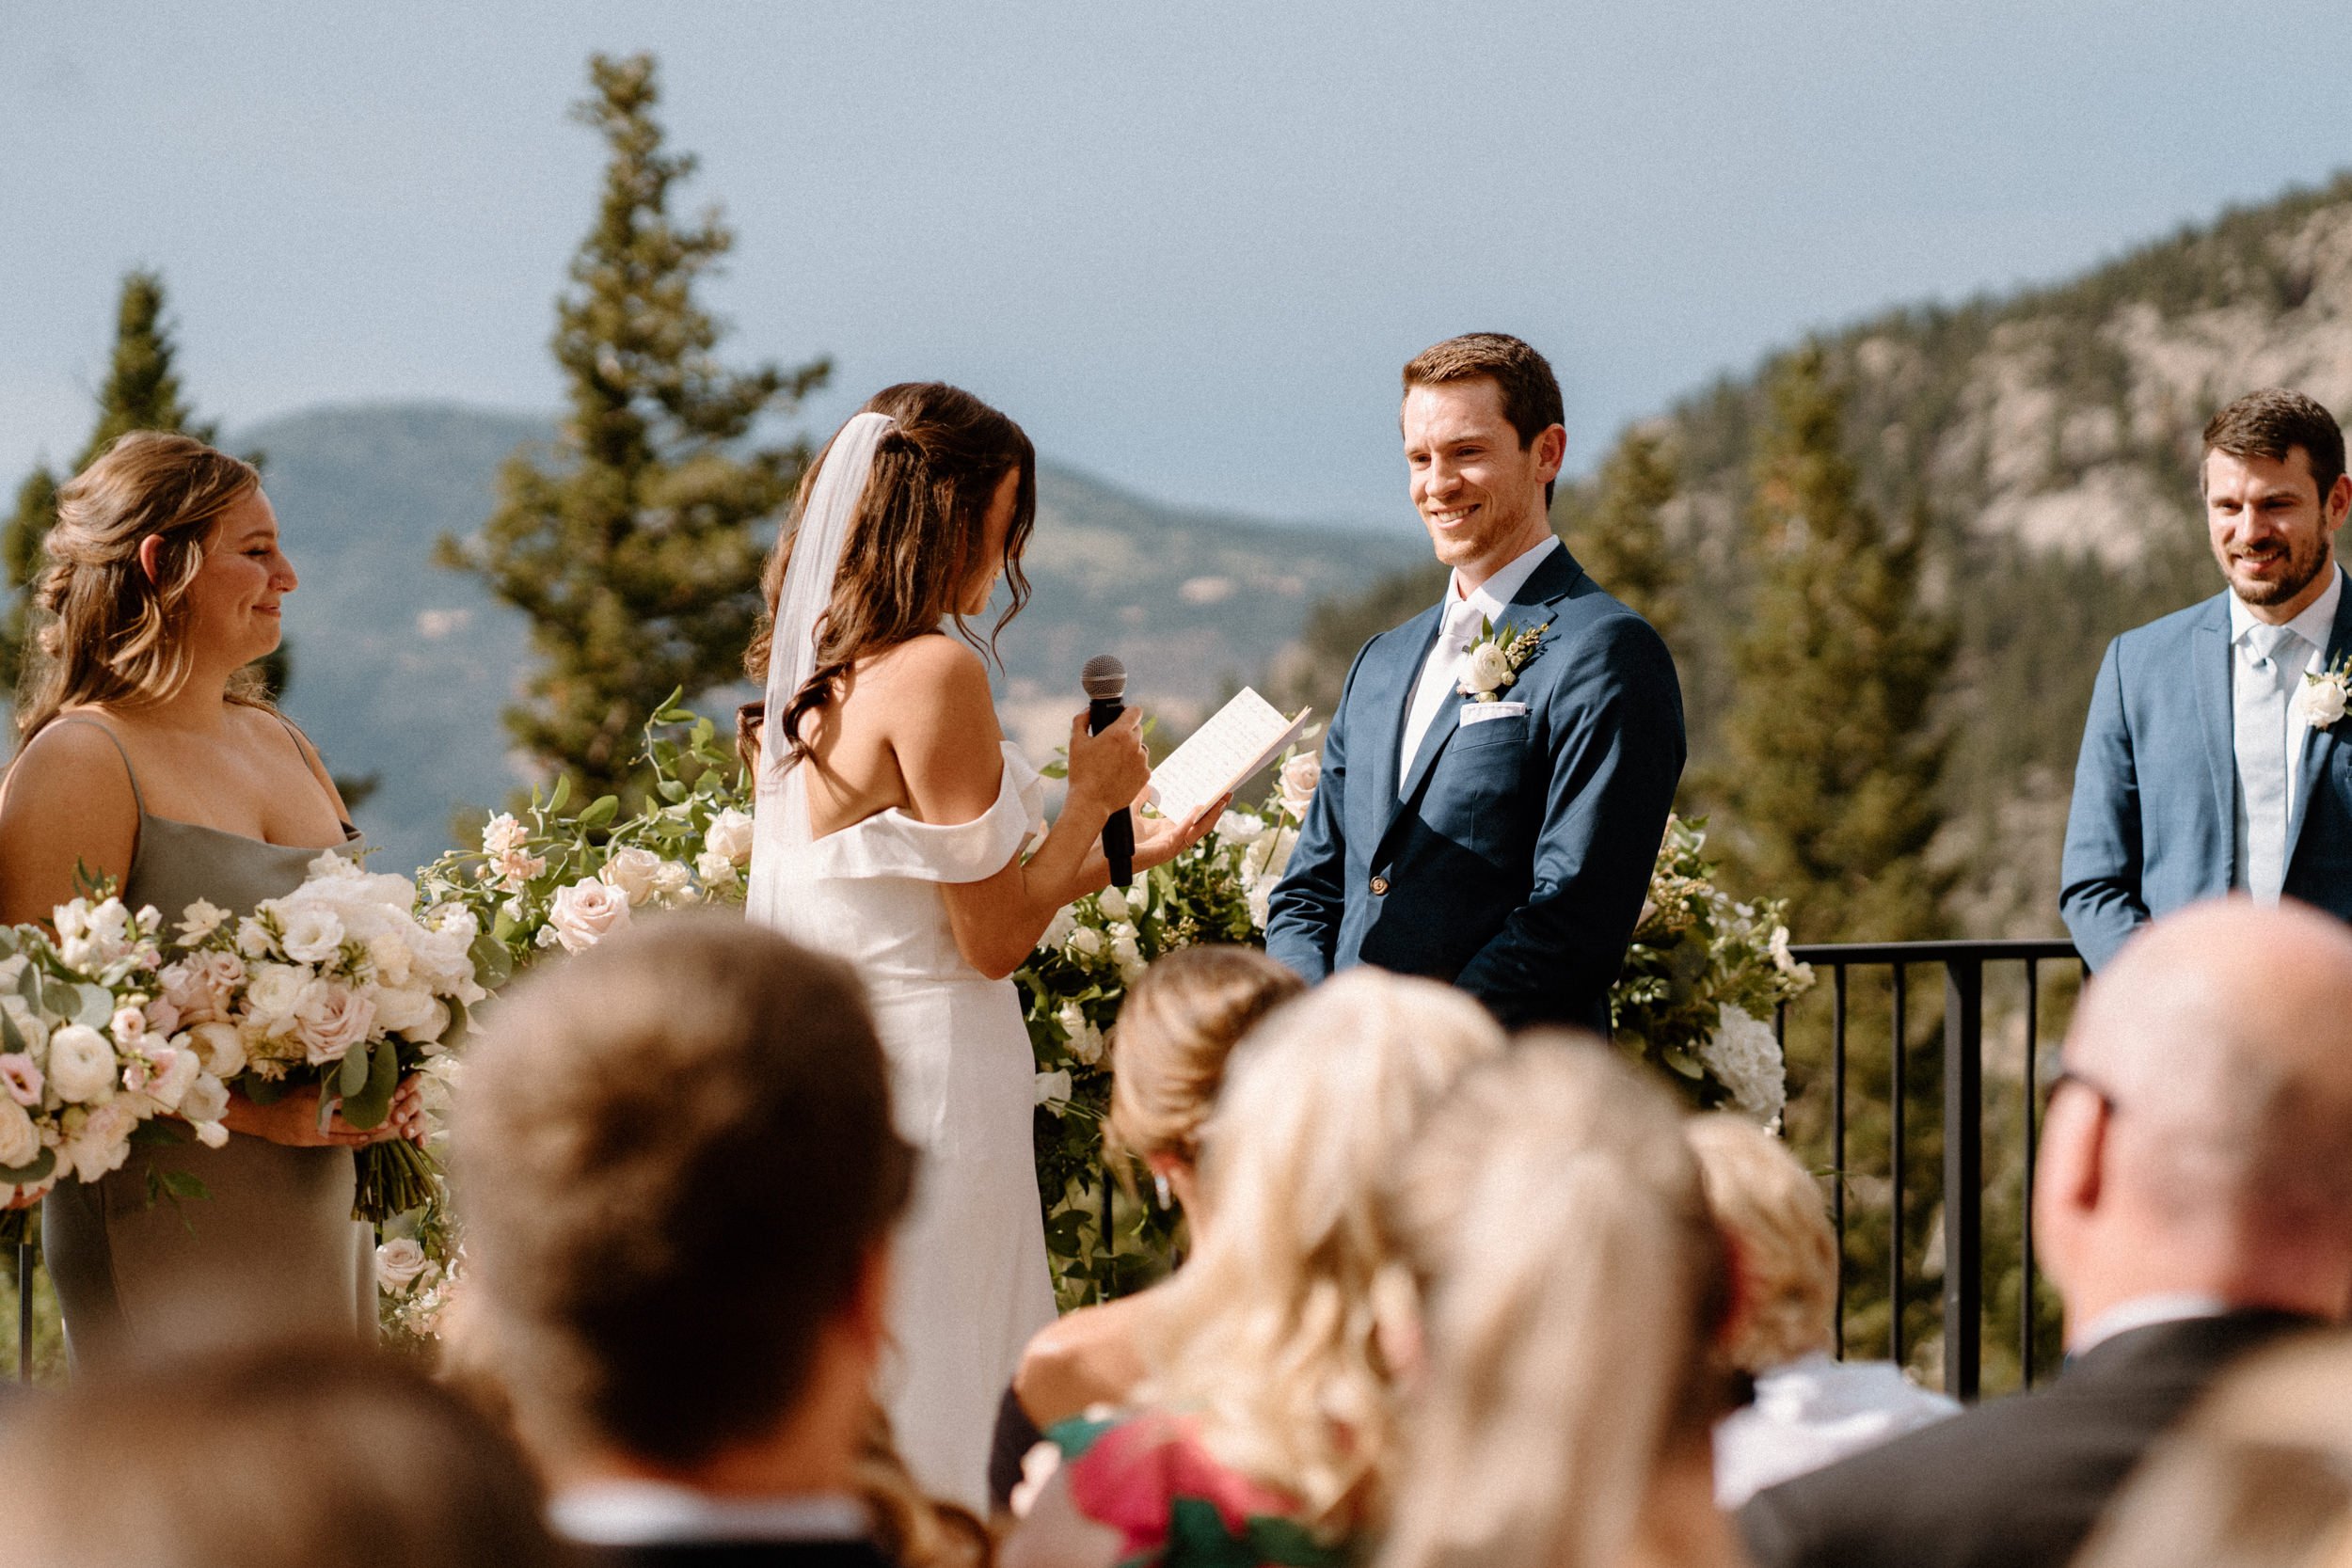 The groom smiles as the bride reads her vows aloud